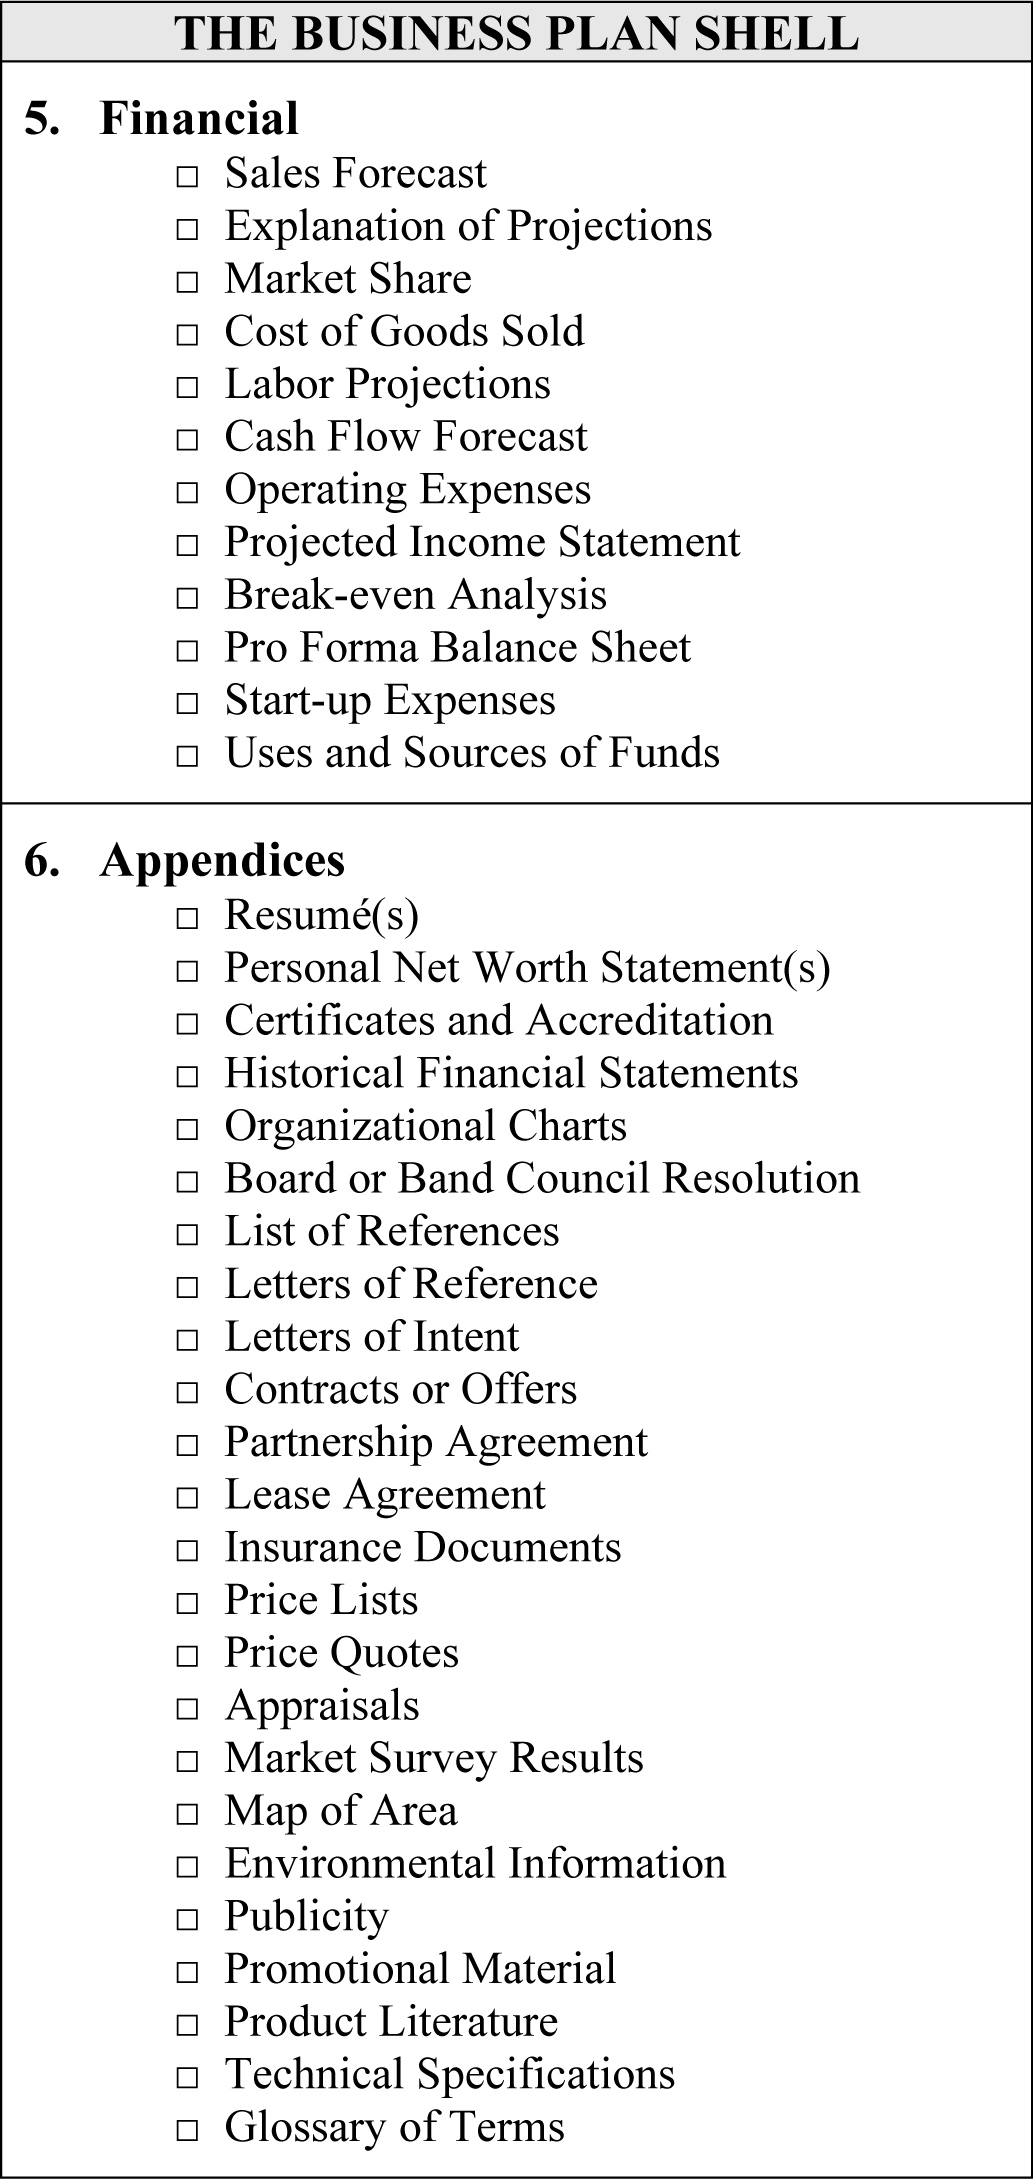 Business plan sources and uses of funds